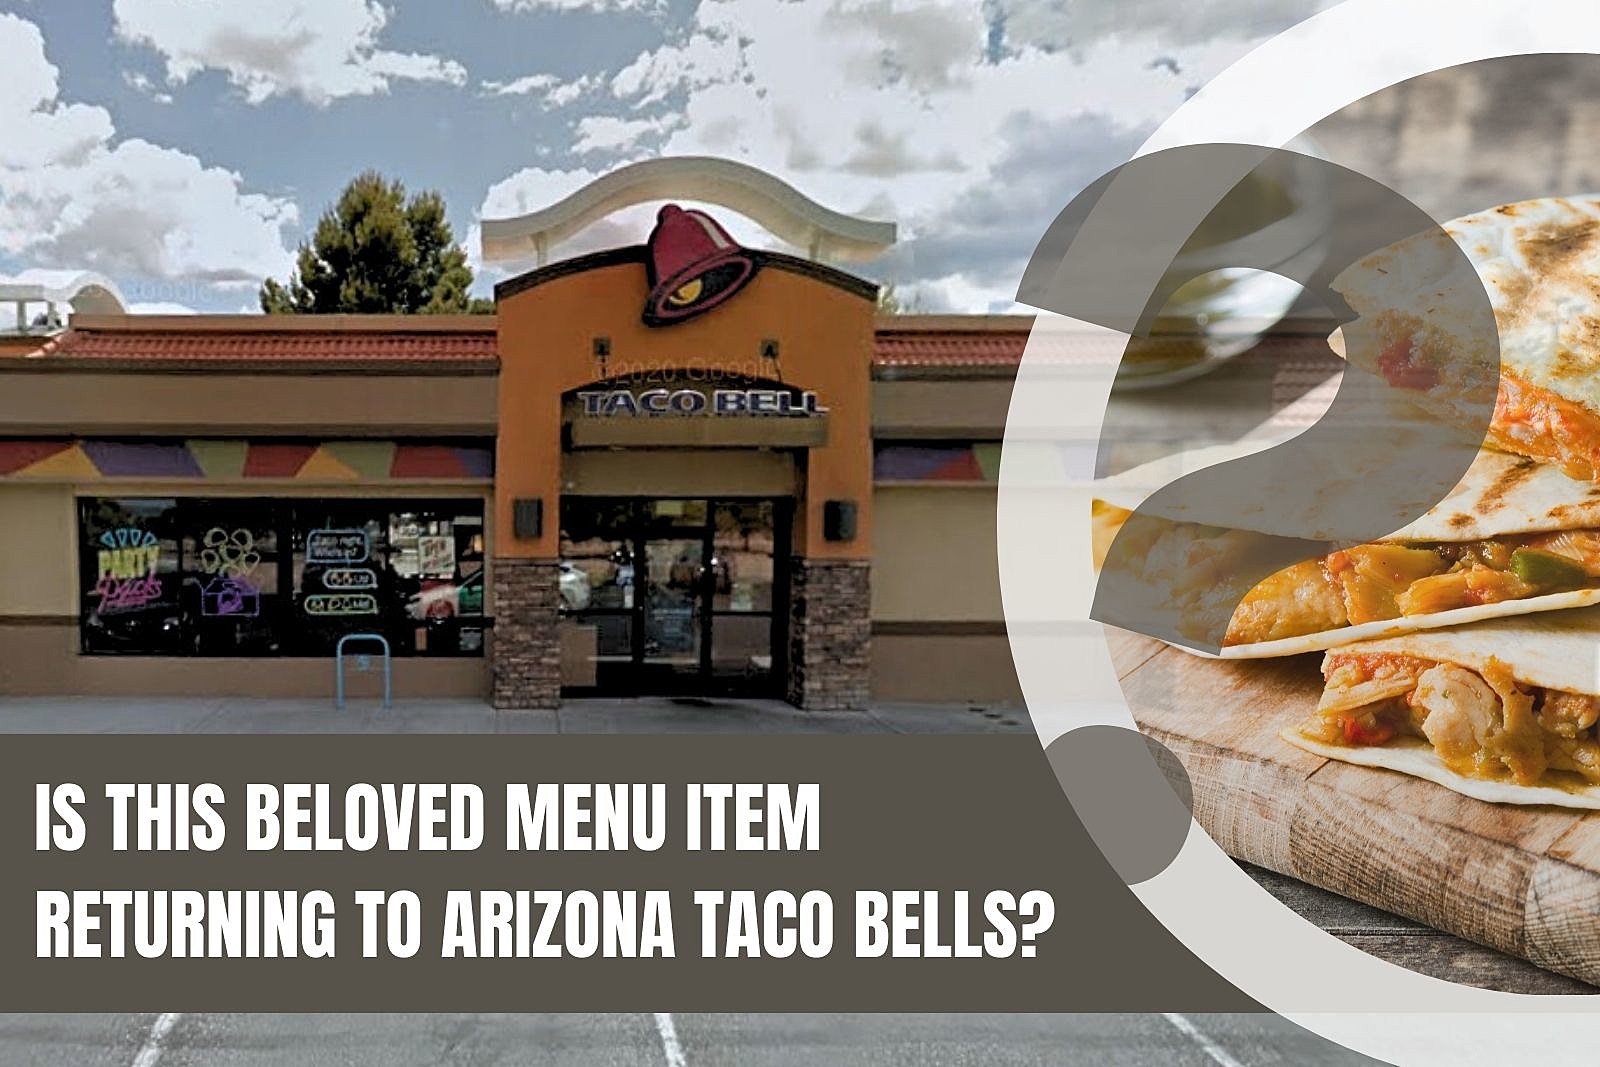 Popular Taco Bell Item Returning to Arizona picture pic